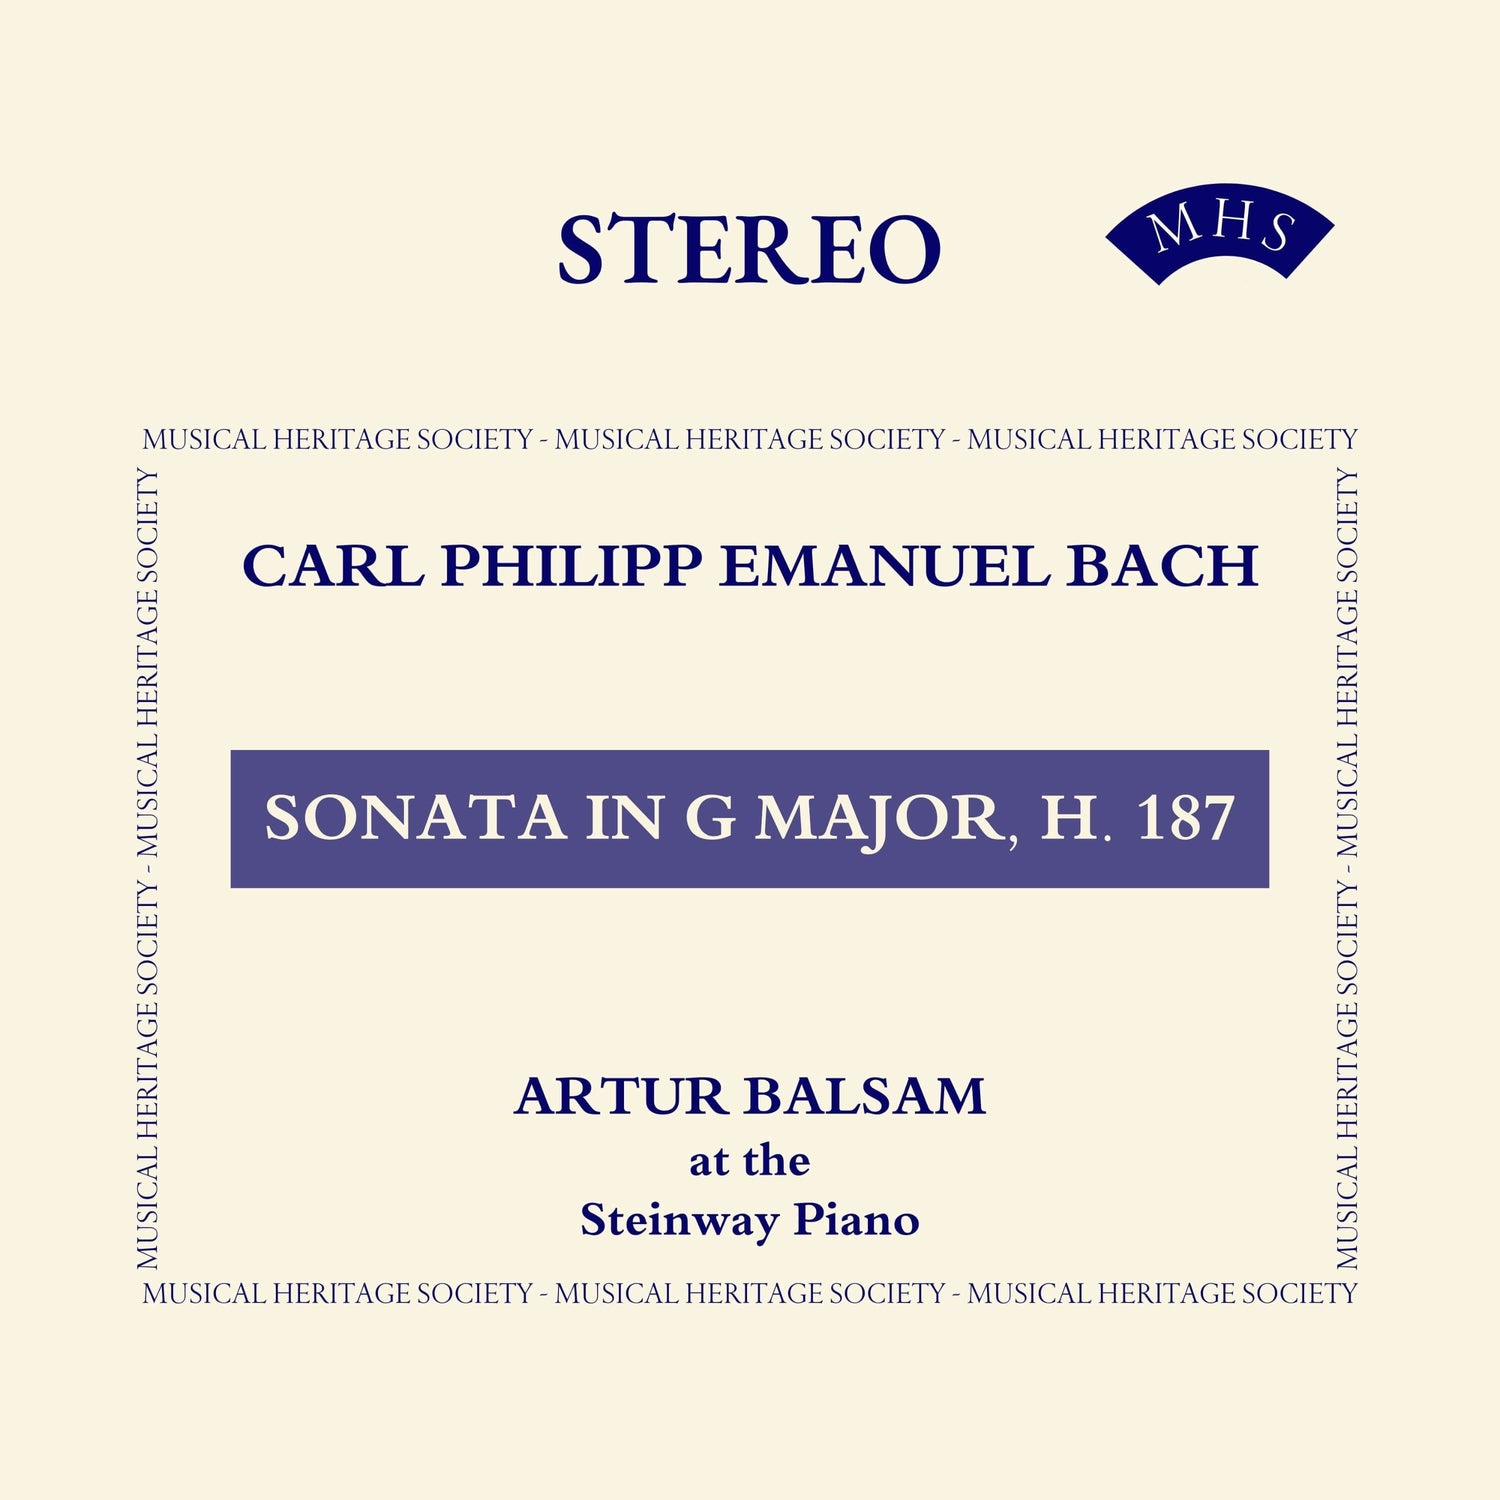 Cover of Carl Philipp Emanuel Bach's Sonata in G Major, H. 187, performed by Artur Balsam at the Steinway Piano, released by Musical Heritage Society.